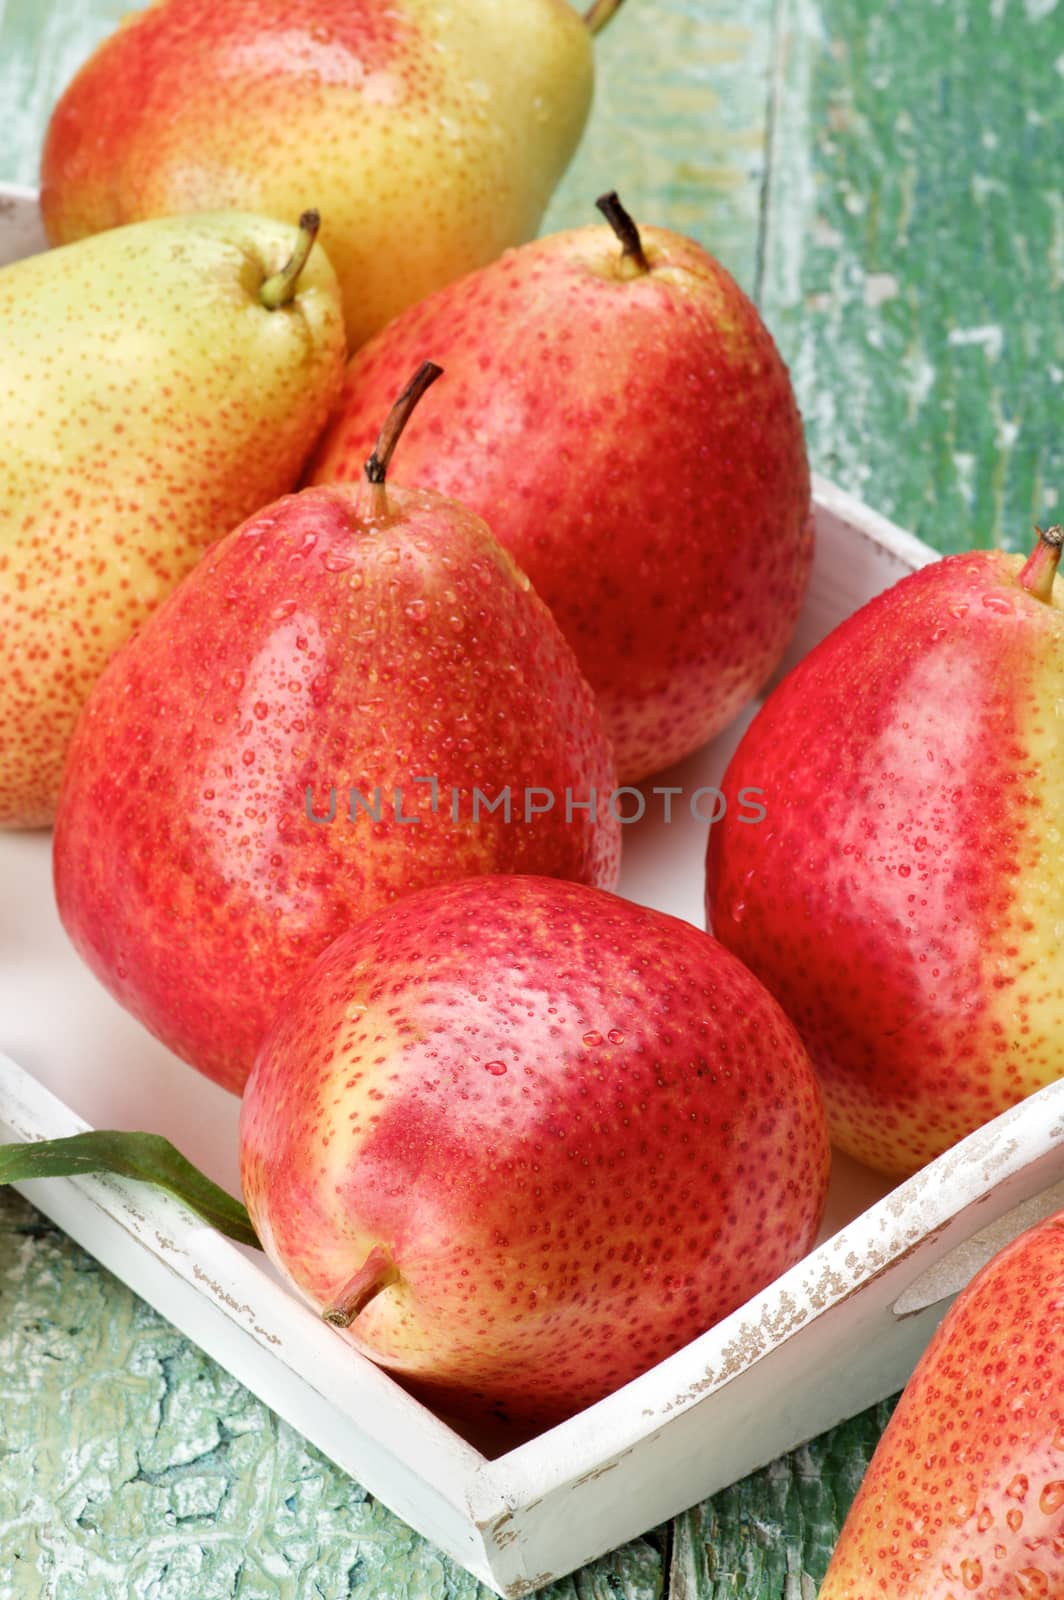 Yellow and Red Pears by zhekos